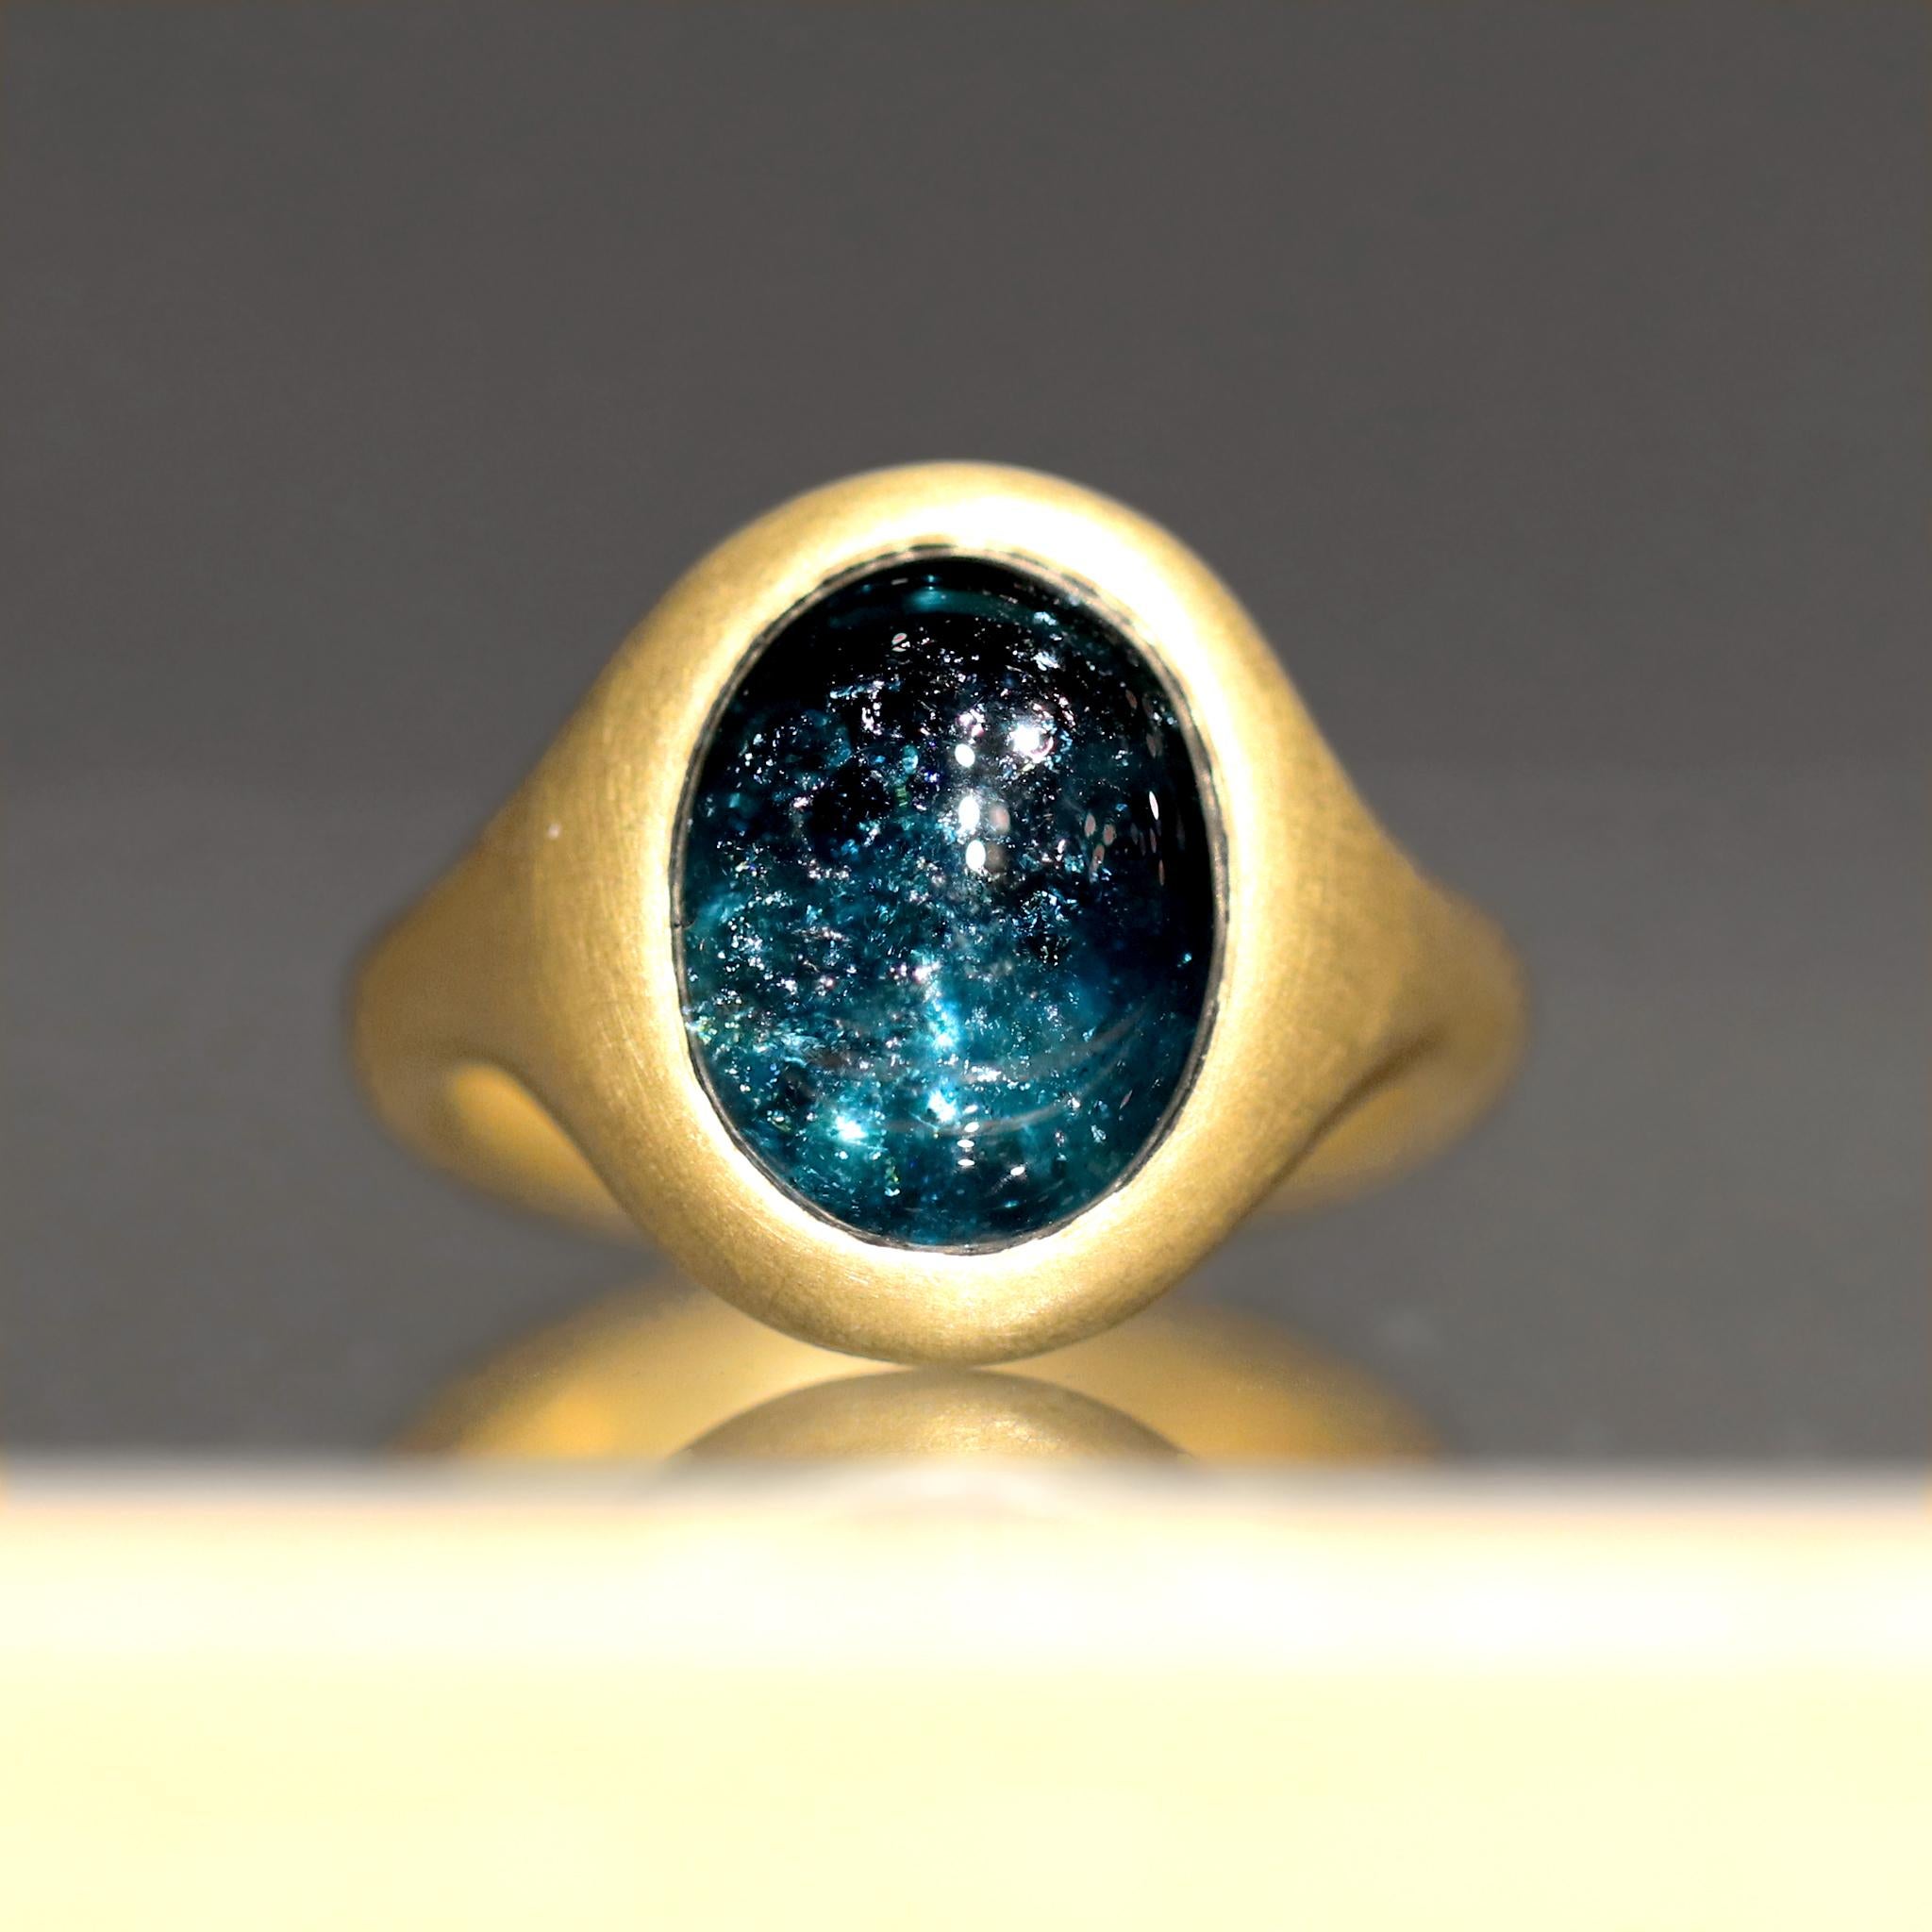 One of a Kind Ring hand-fabricated by jewelry maker Lola Brooks showcasing an absolutely spectacular, glowing 5.32 carat deep blue indicolite tourmaline oval cabochon that features a galaxy within, bezel-set in the artist's signature cast and